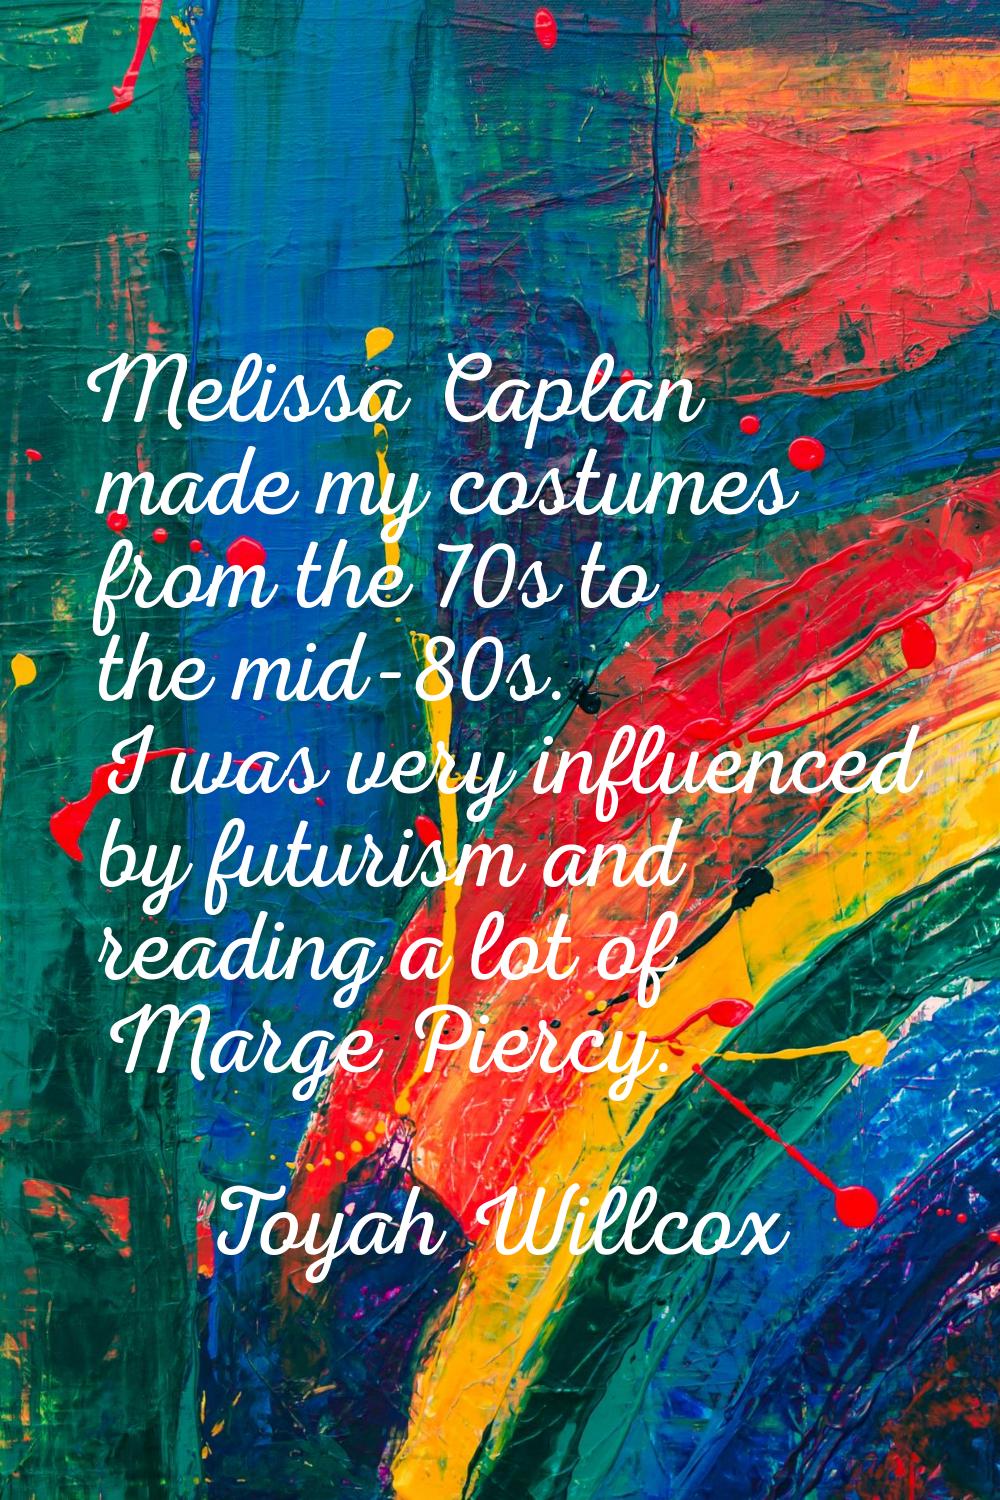 Melissa Caplan made my costumes from the 70s to the mid-80s. I was very influenced by futurism and 